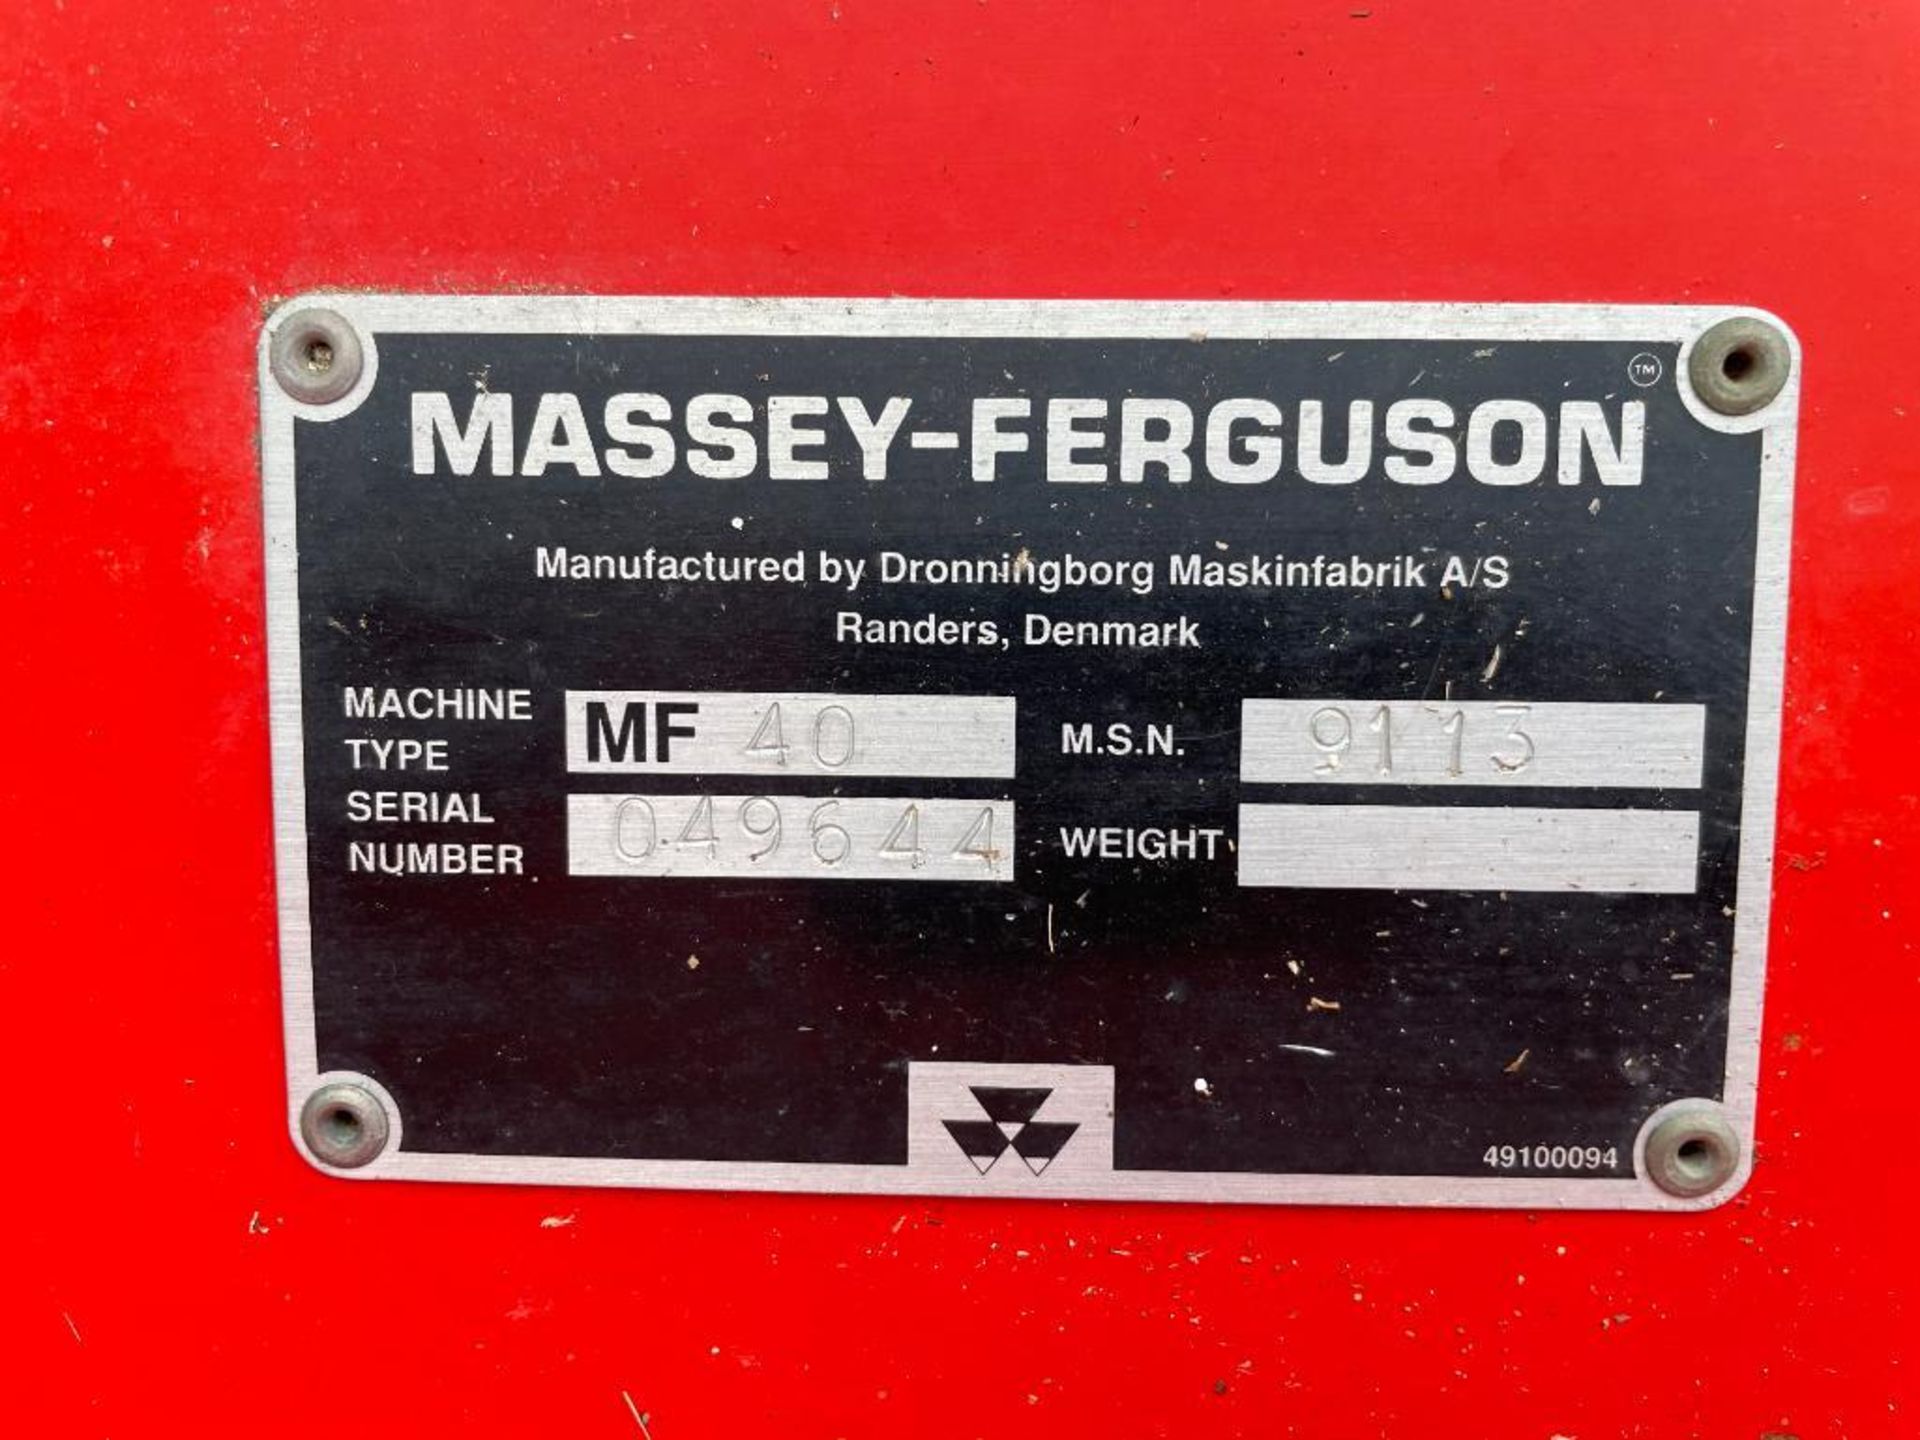 1992 Massey Ferguson 40RS combine harvester with 20ft powerflow header and trolley, datavision scree - Image 7 of 13